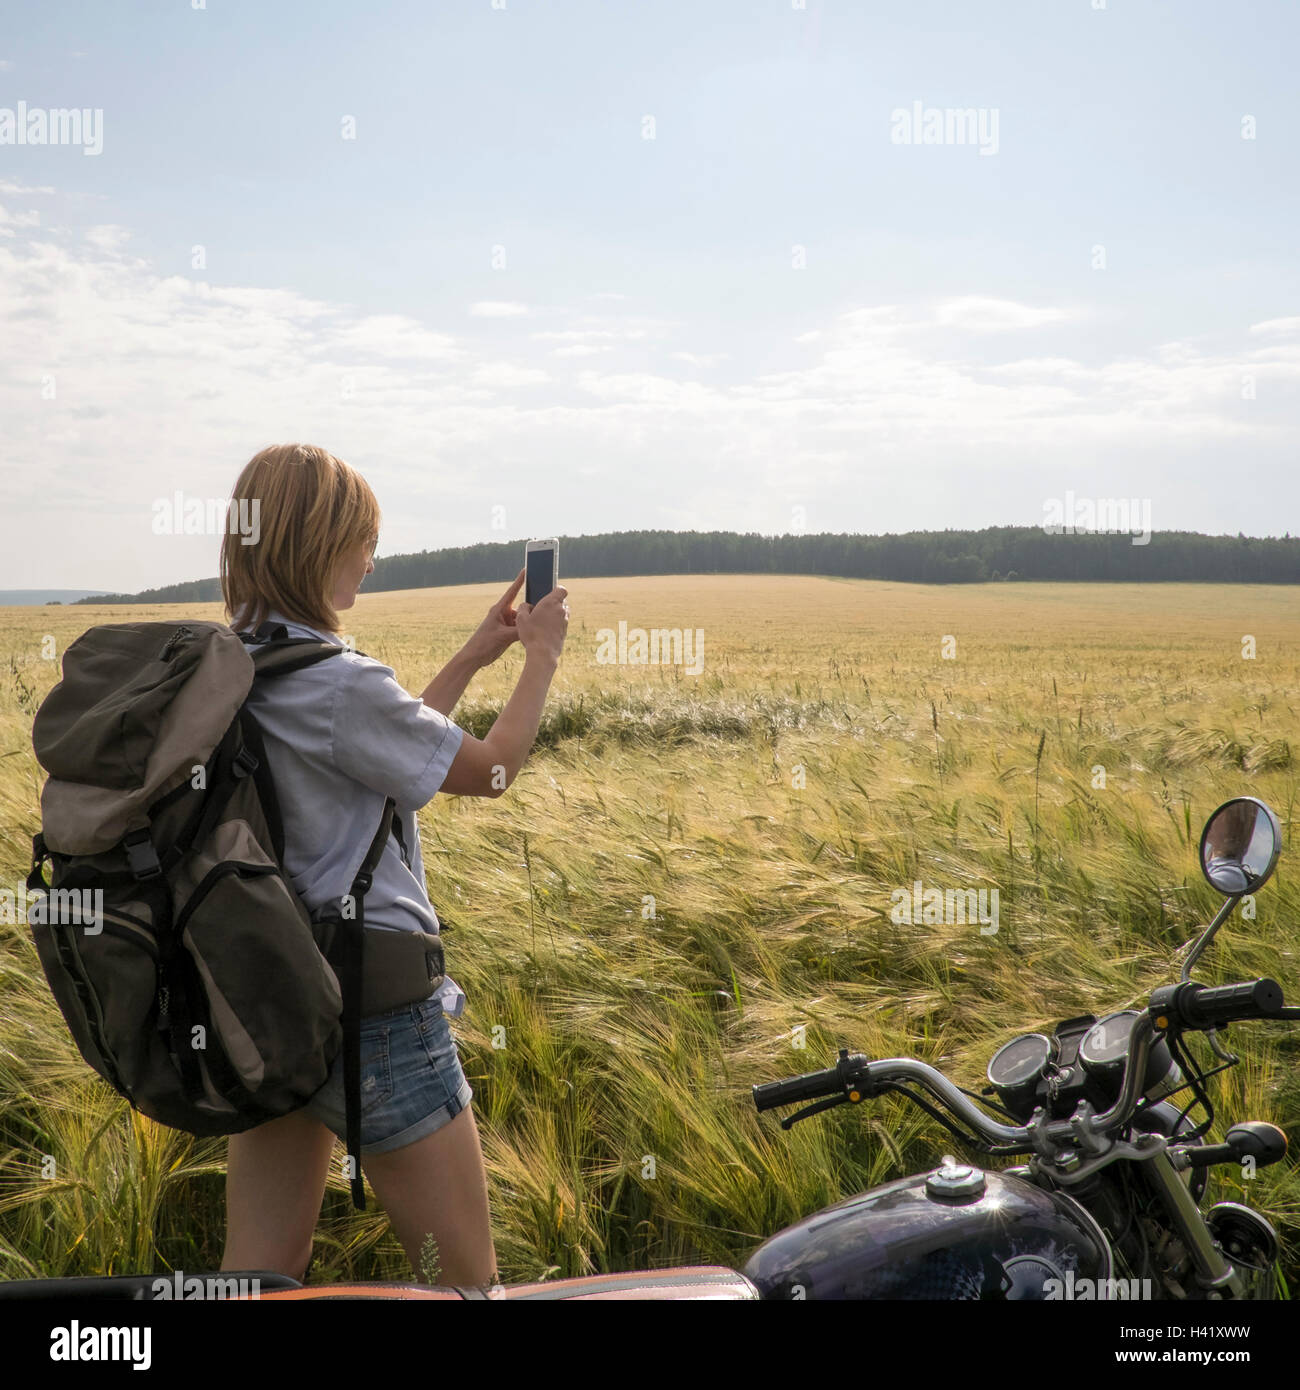 Caucasian woman standing in field near motorcycle using cell phone Stock Photo